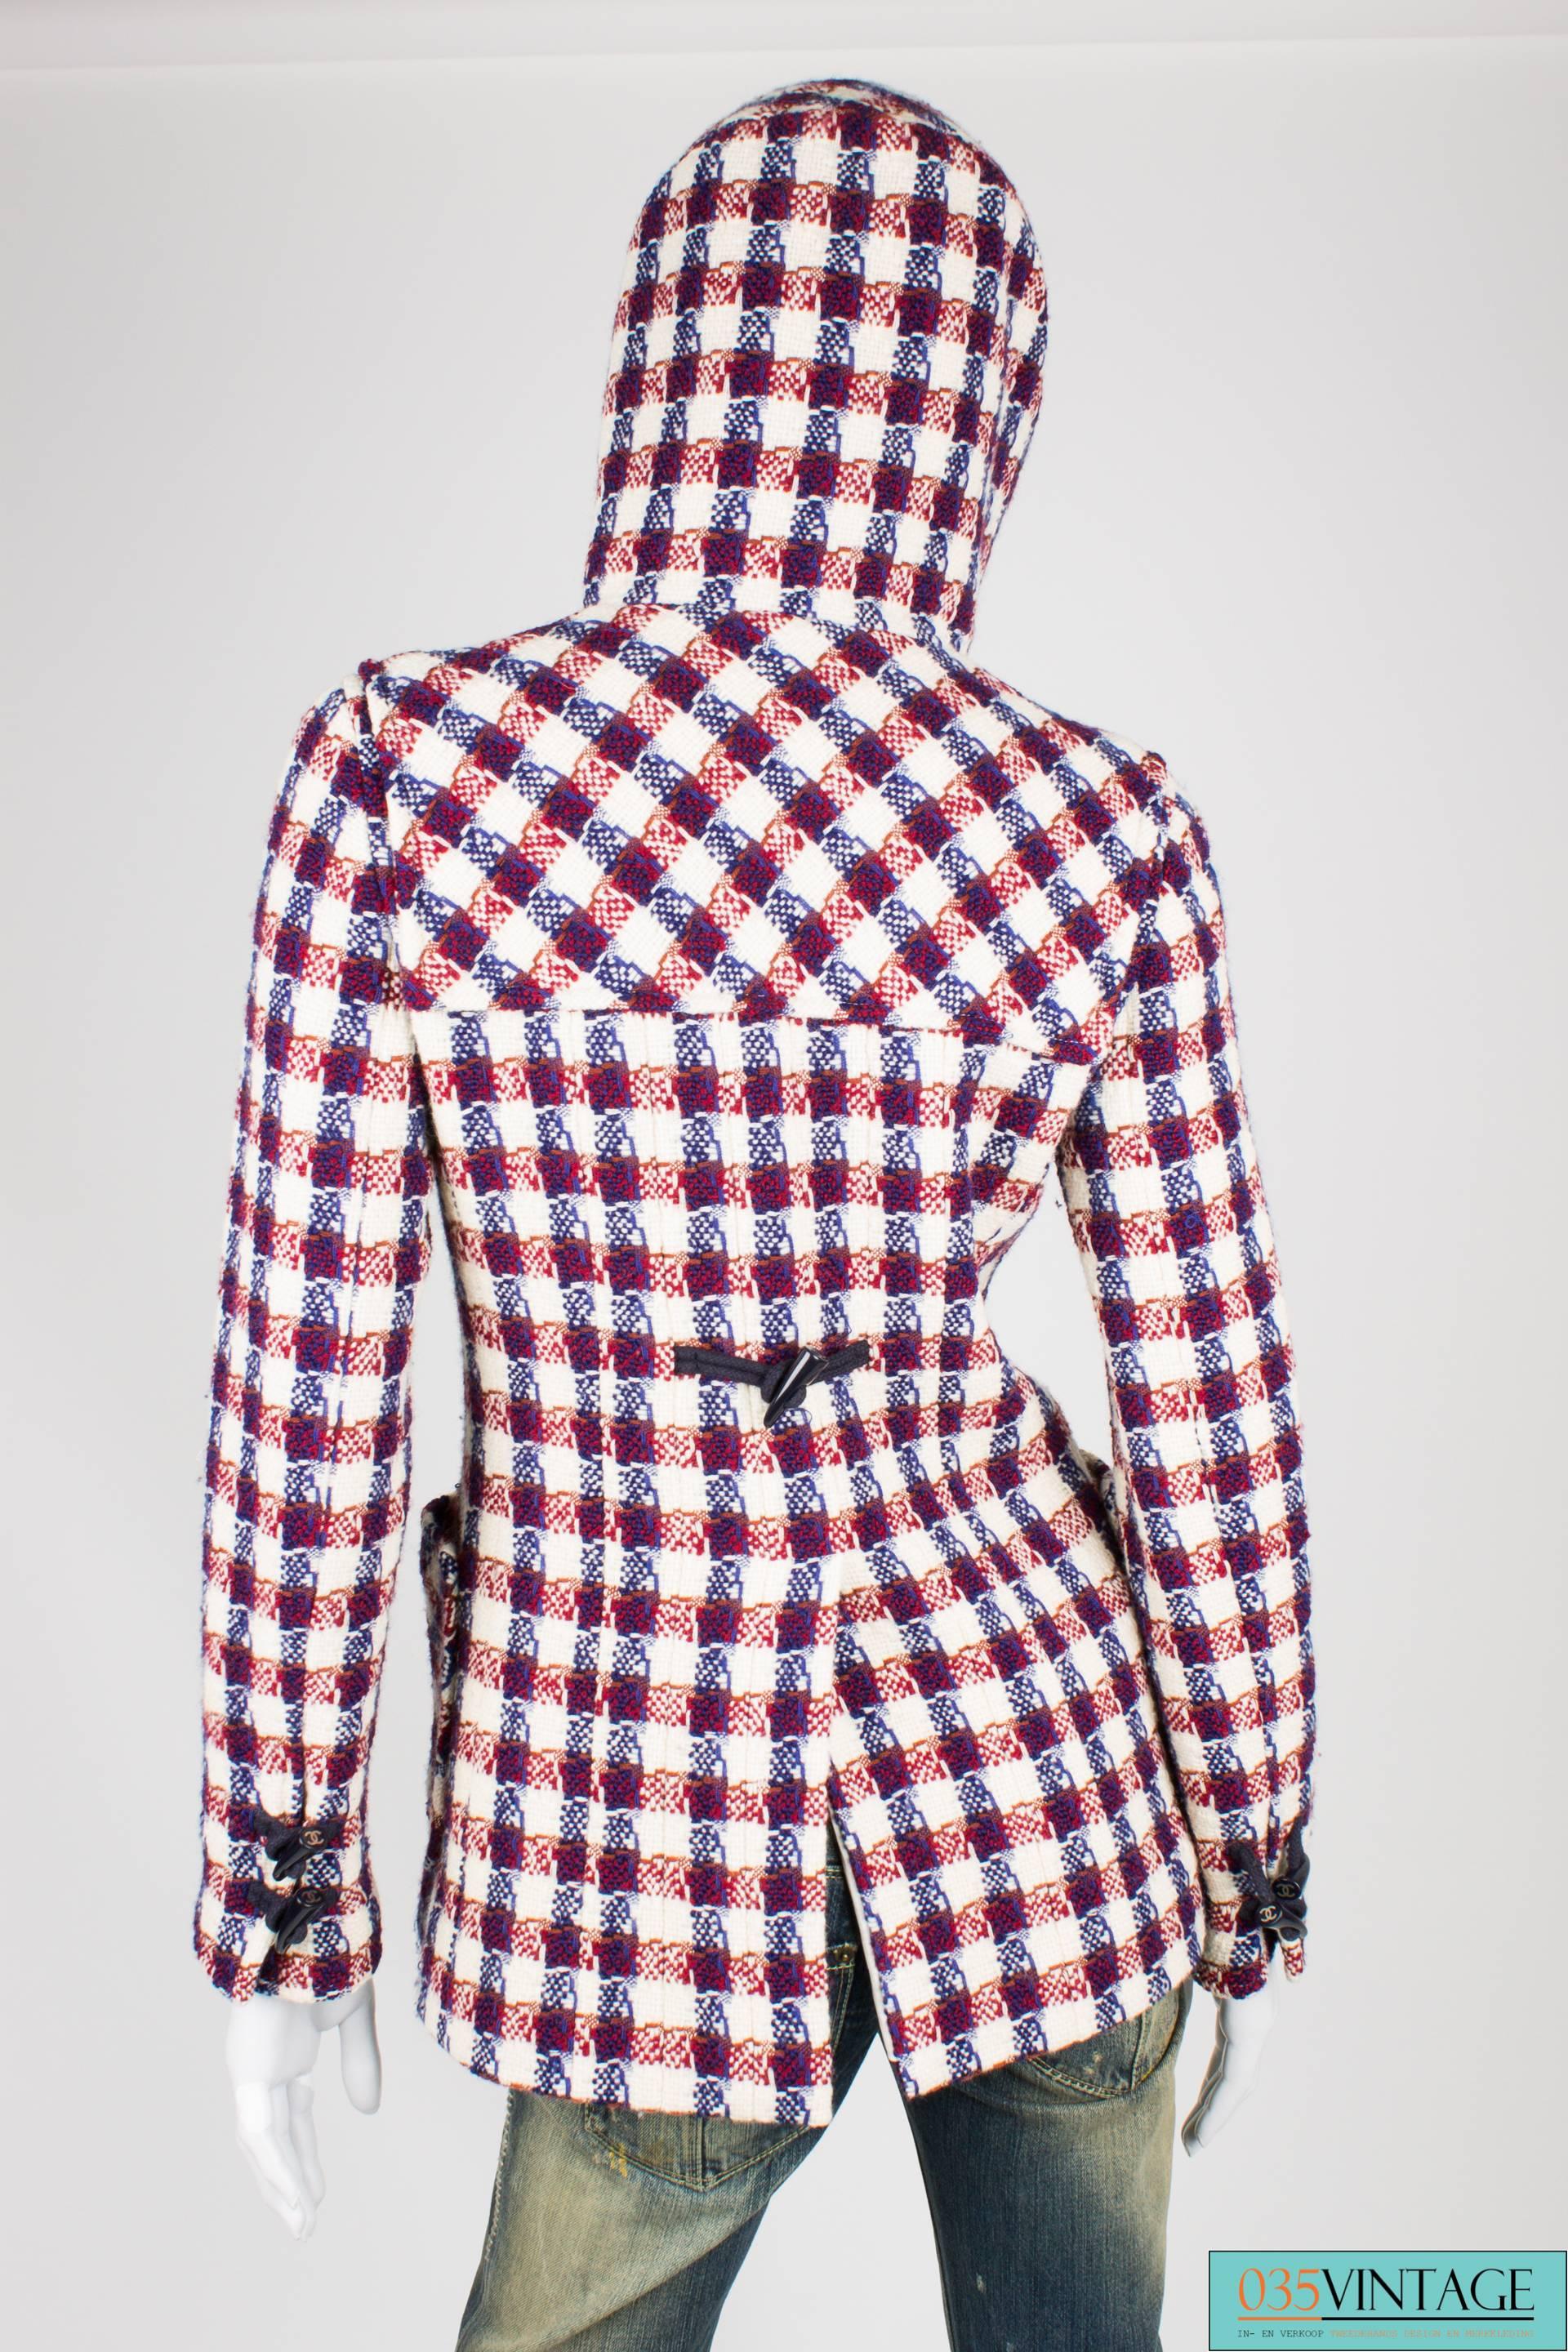 Red, white and blue checkered hooded jacket by Chanel. 

This woven jacket is made of 100% wool and has a toggle fastening at the front. These toggles are made of dark blue plastic and they hold a silver interlocking CC logo. At the end of the